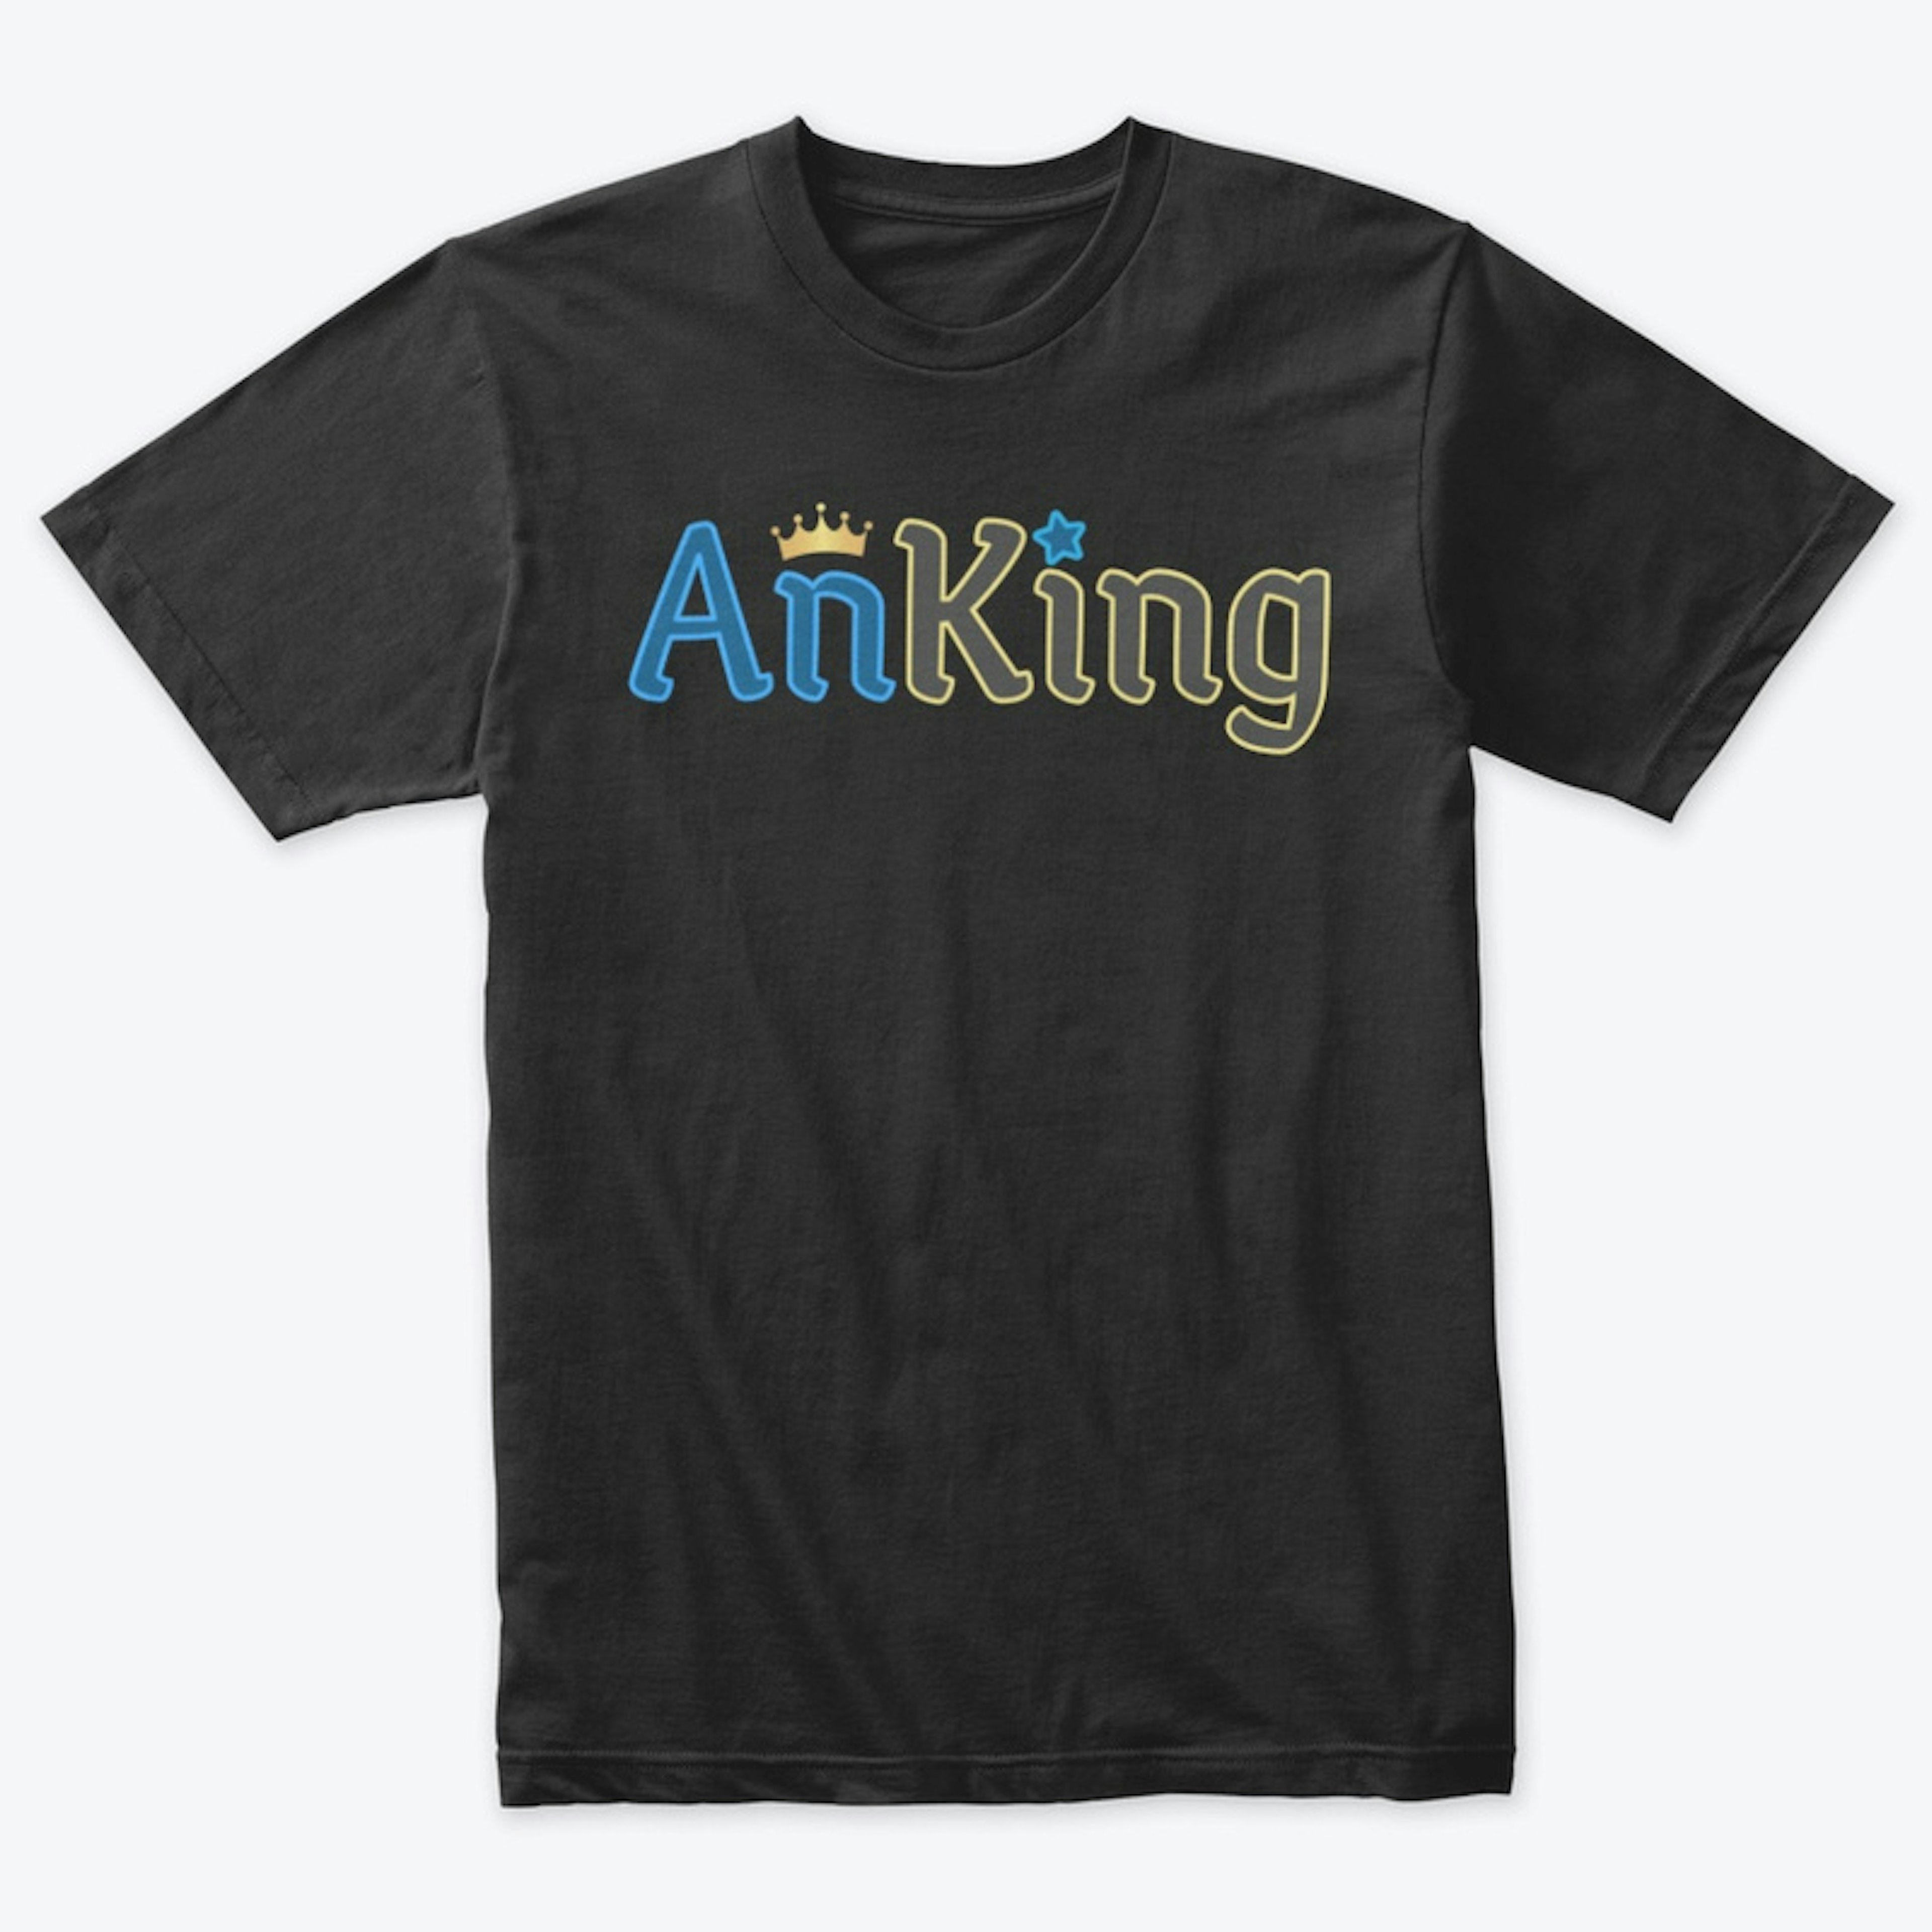 The AnKing